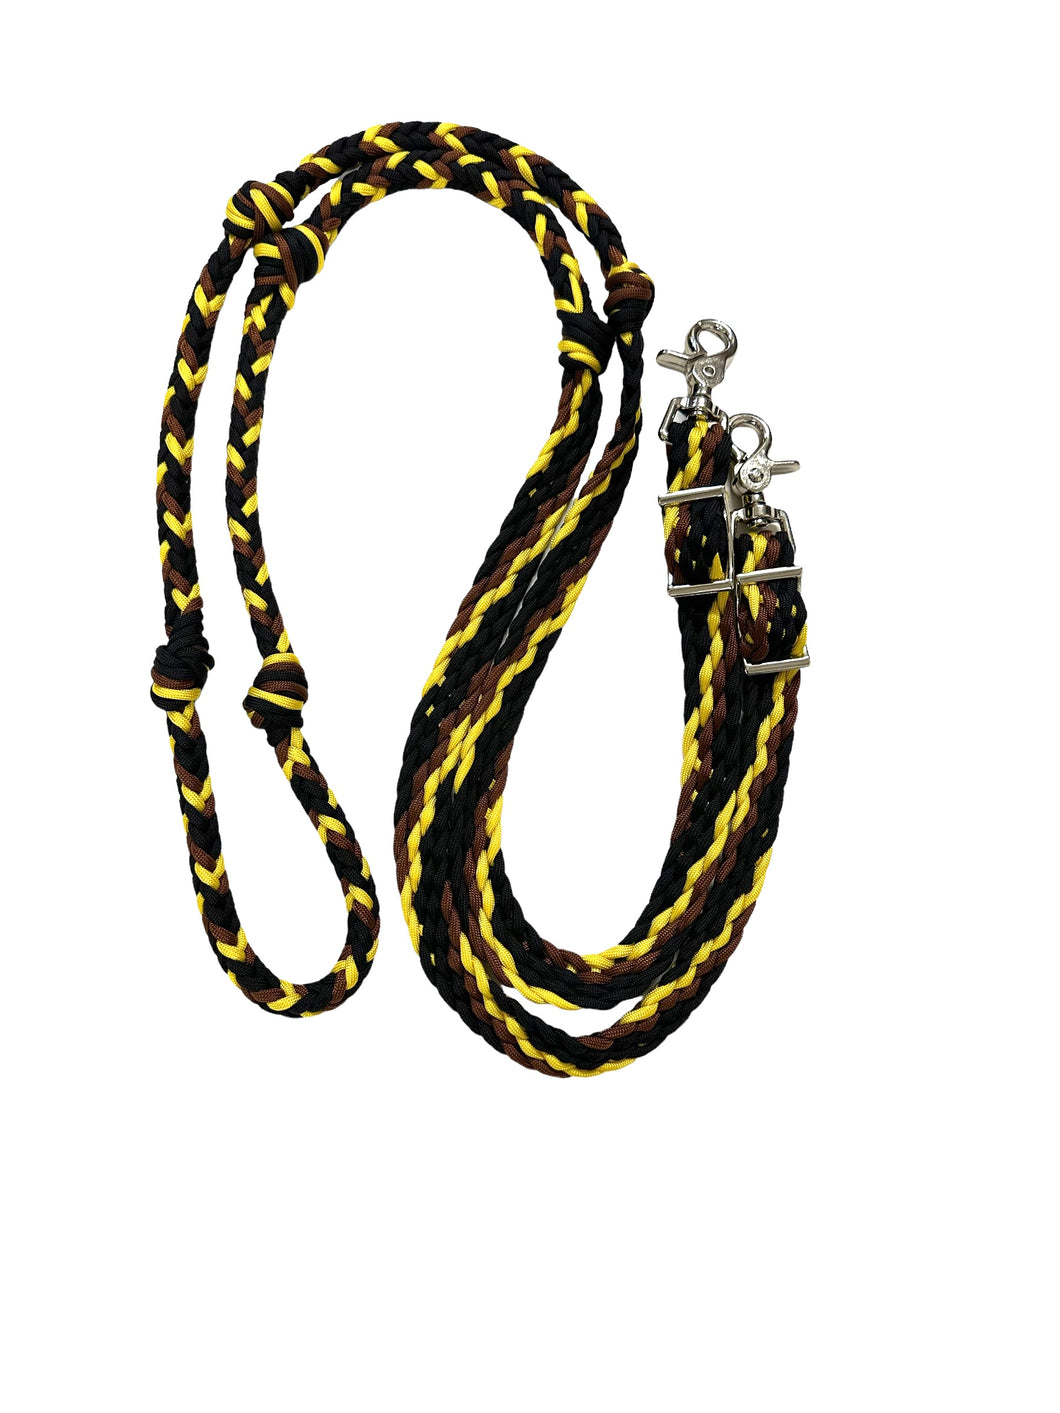 Sunflower Barrel Reins, Round with grip knots...You choose color and length